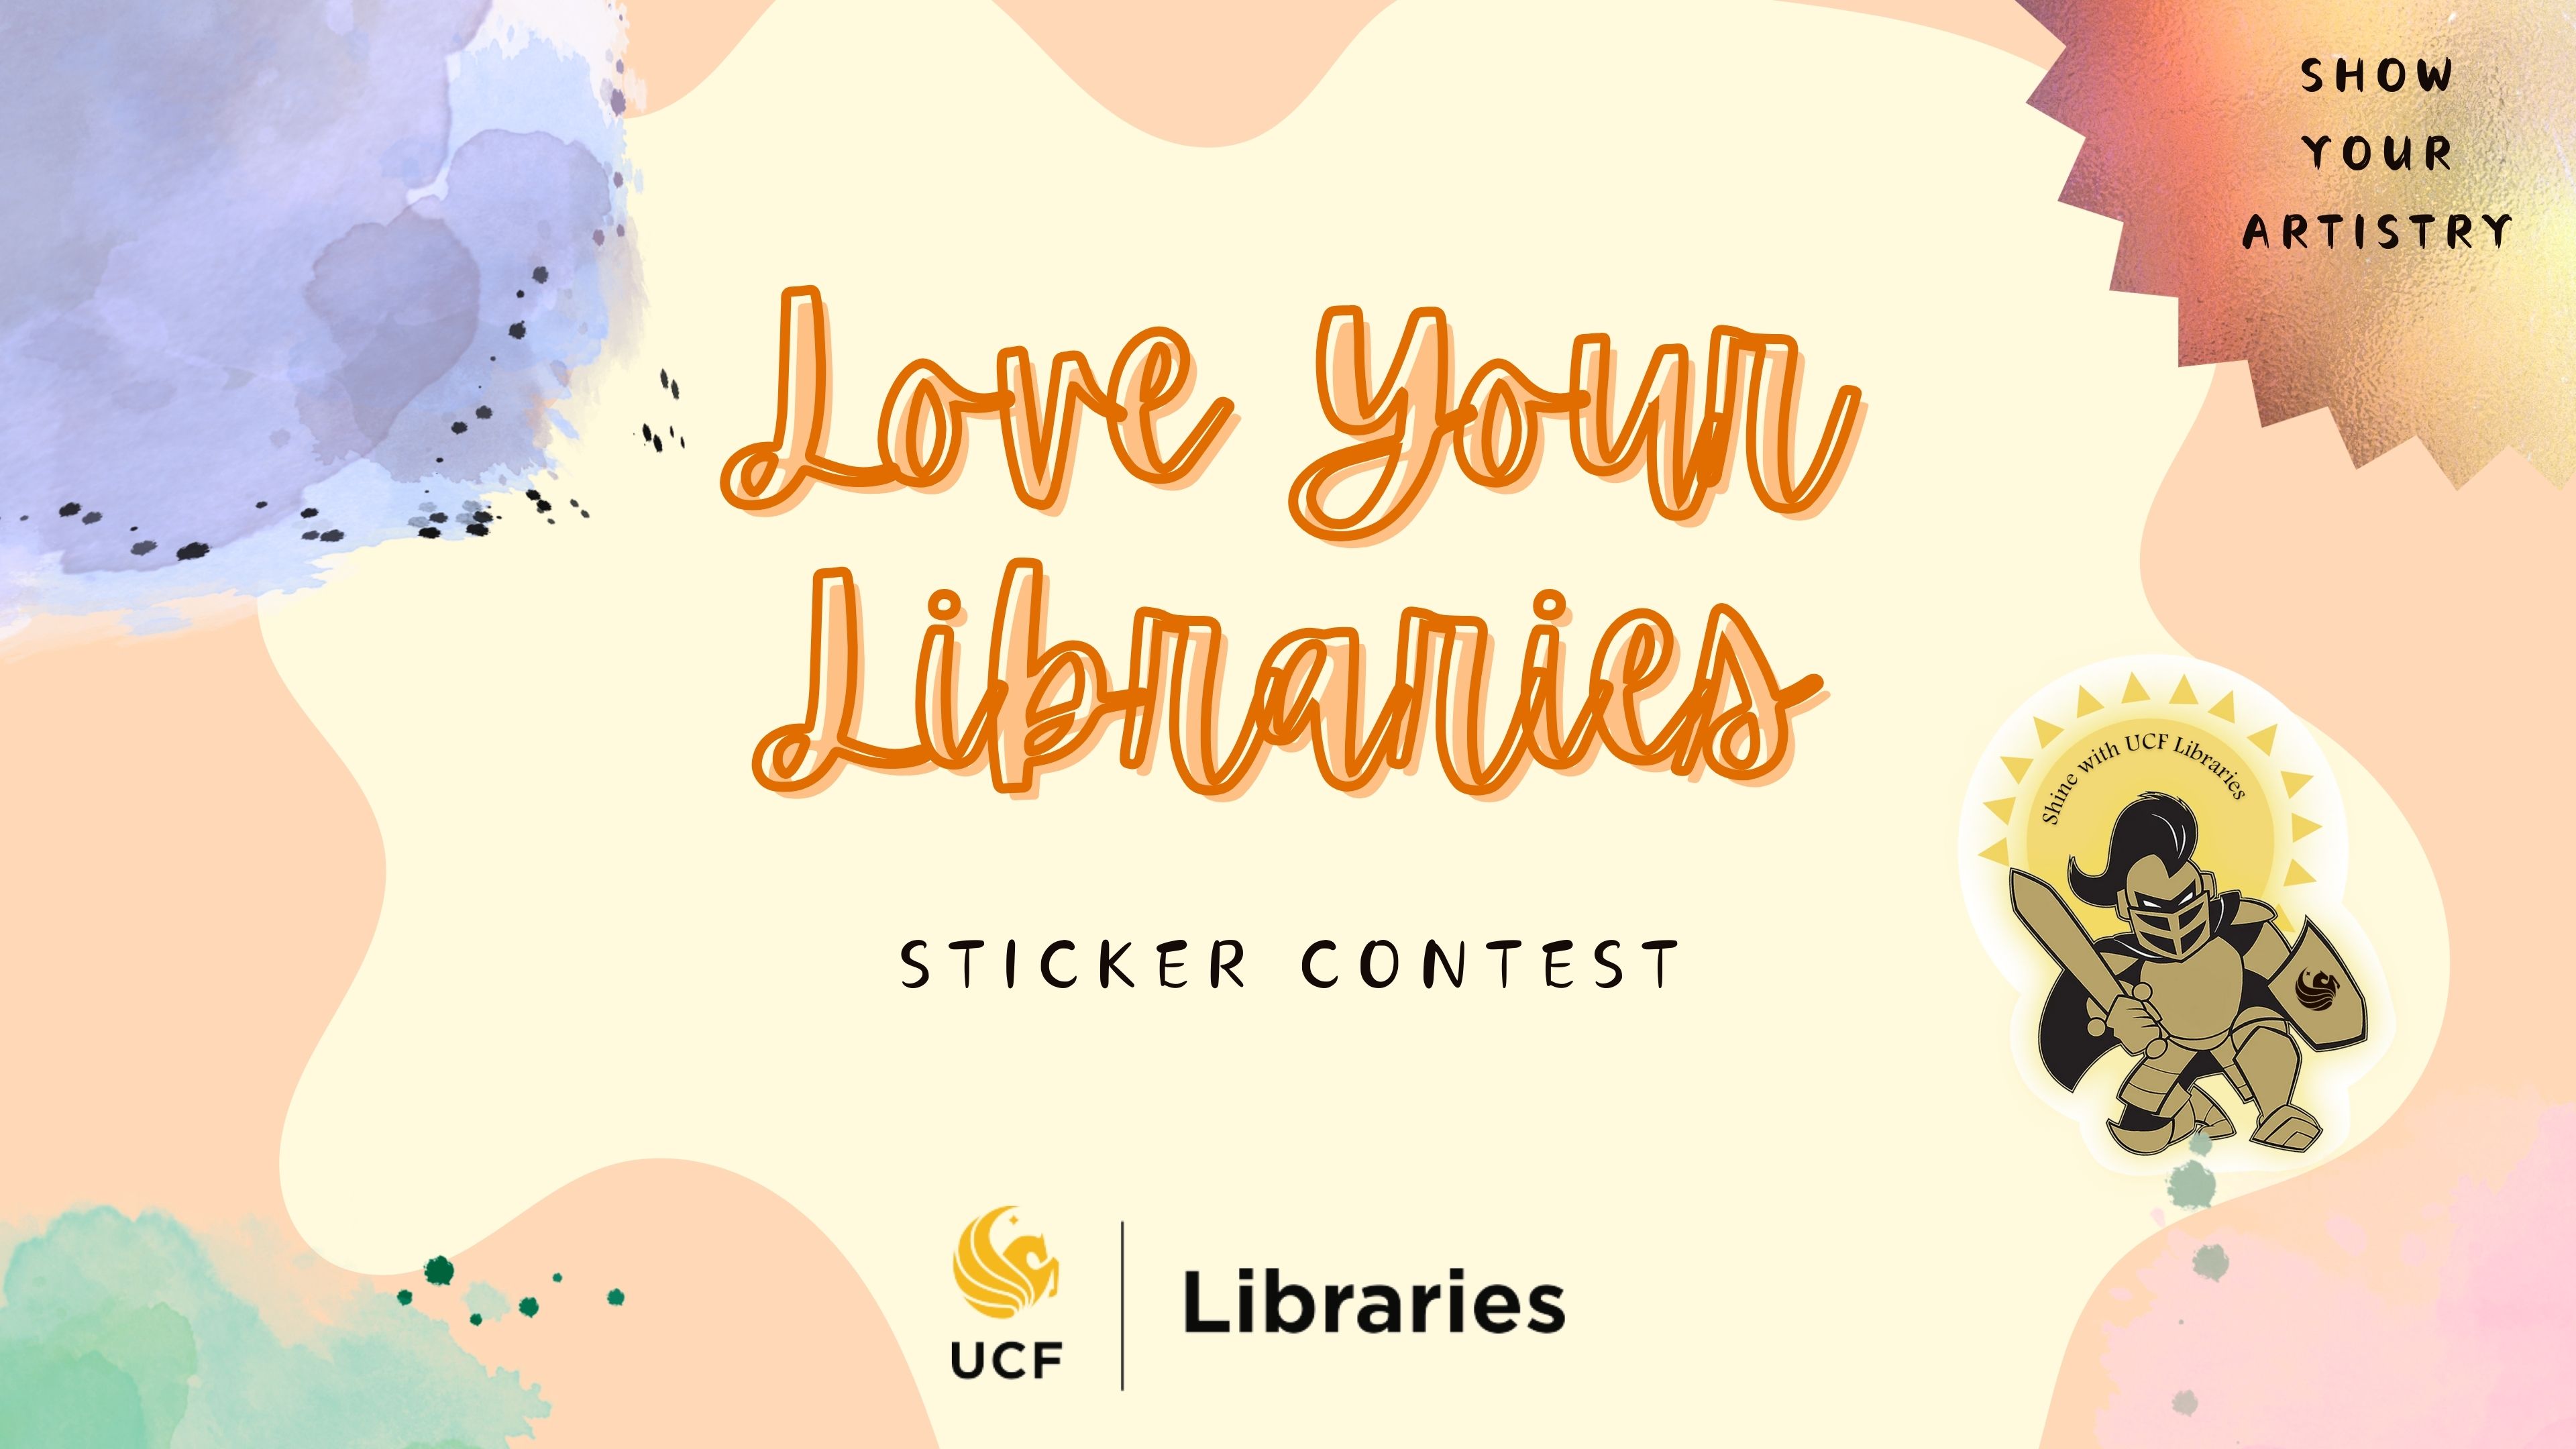 Love Your Libraries Sticker Contest